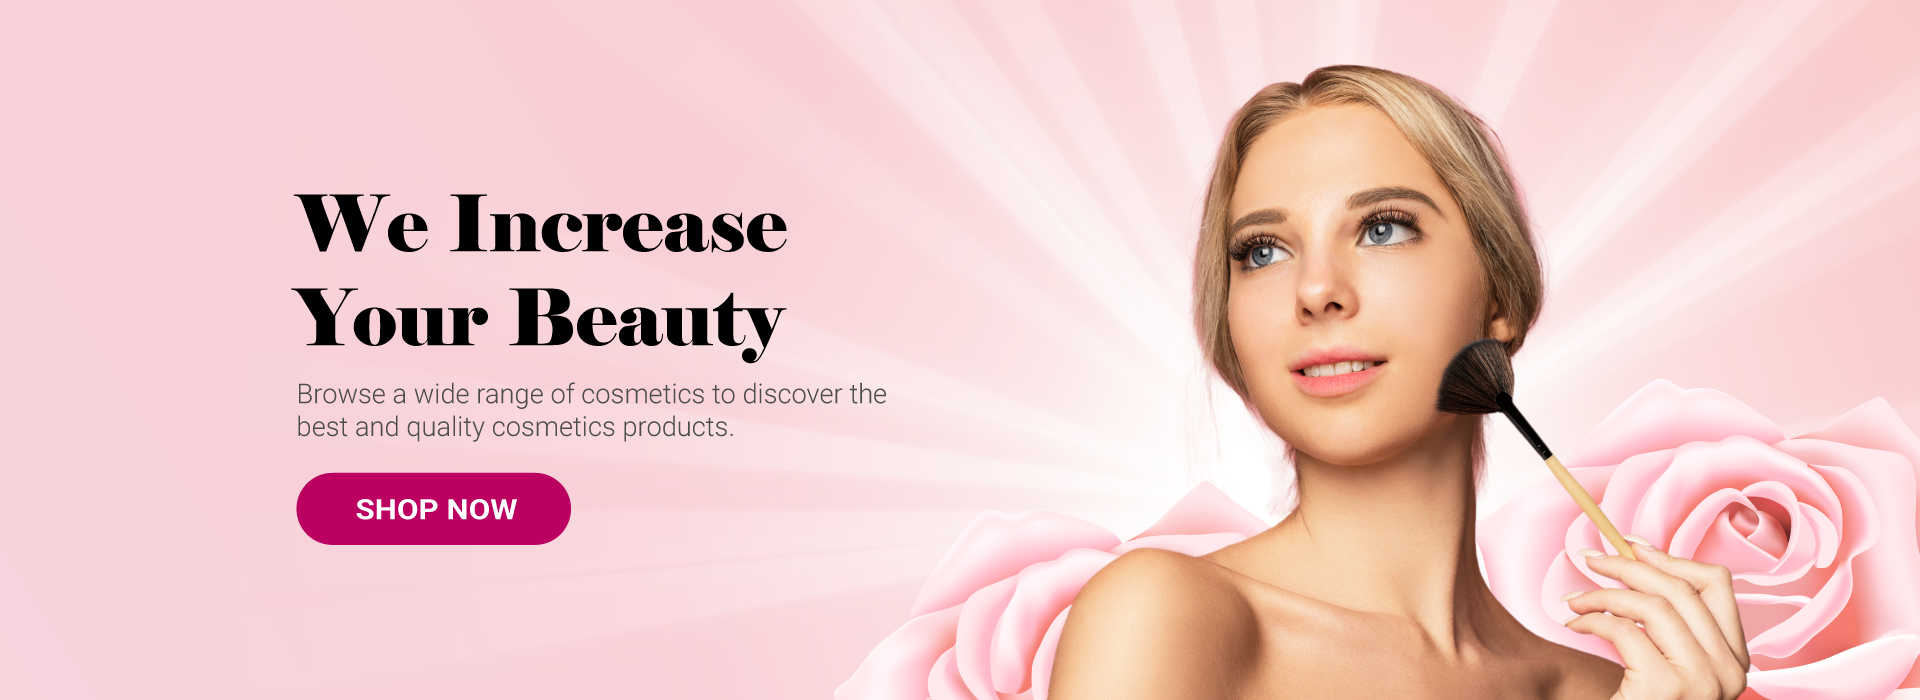 We Increase Your Beauty